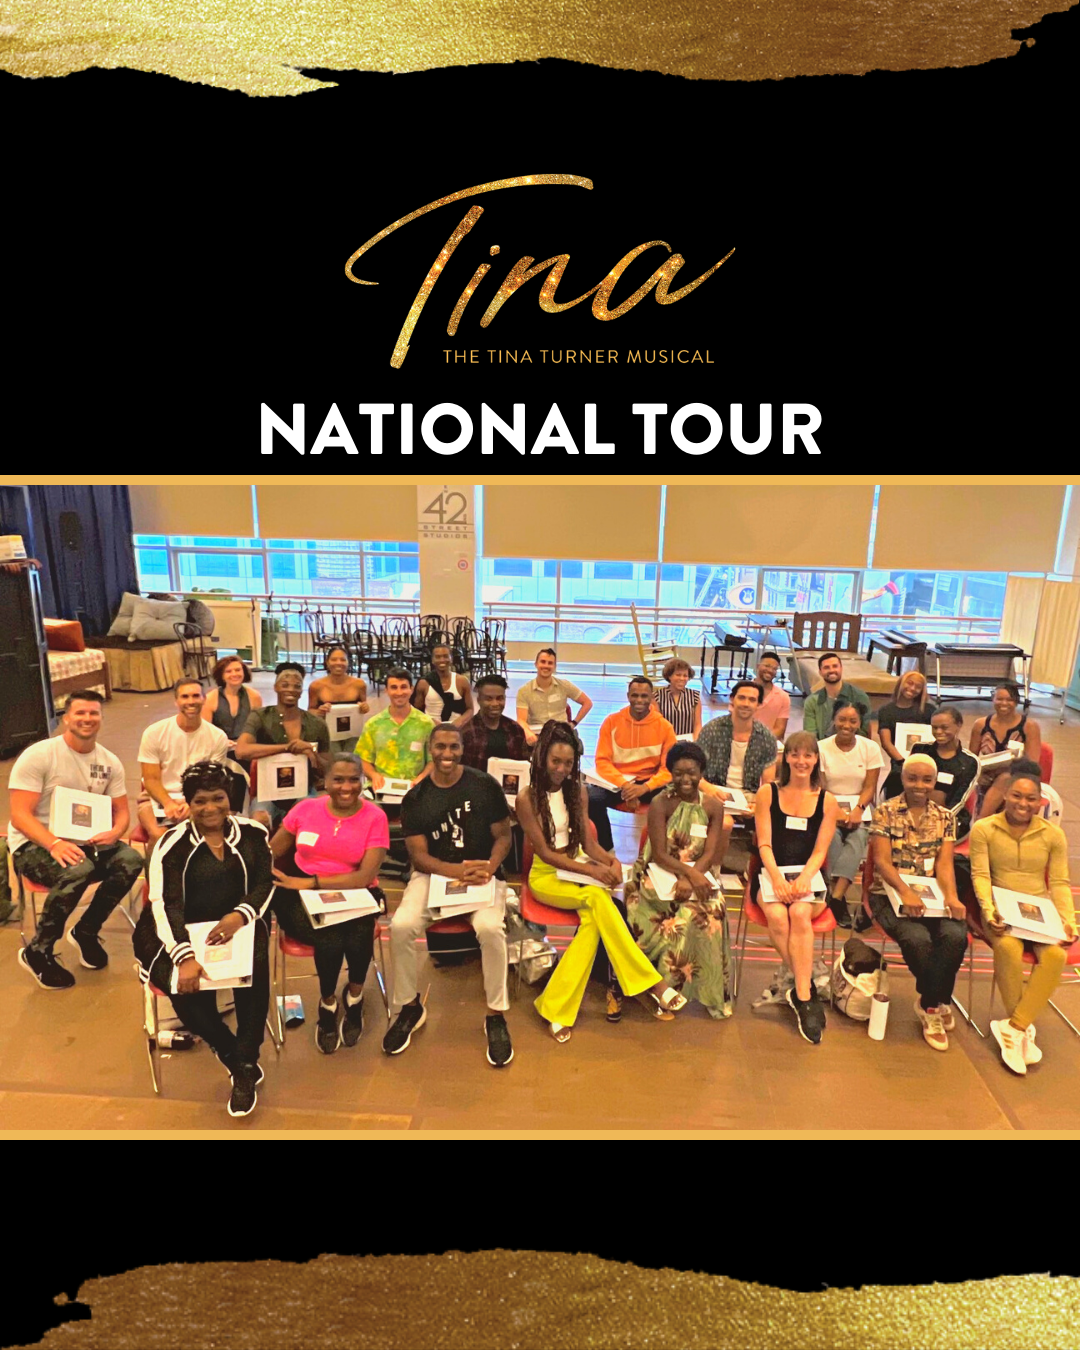 Casting Announced for the National Tour of TINA THE TINA TURNER